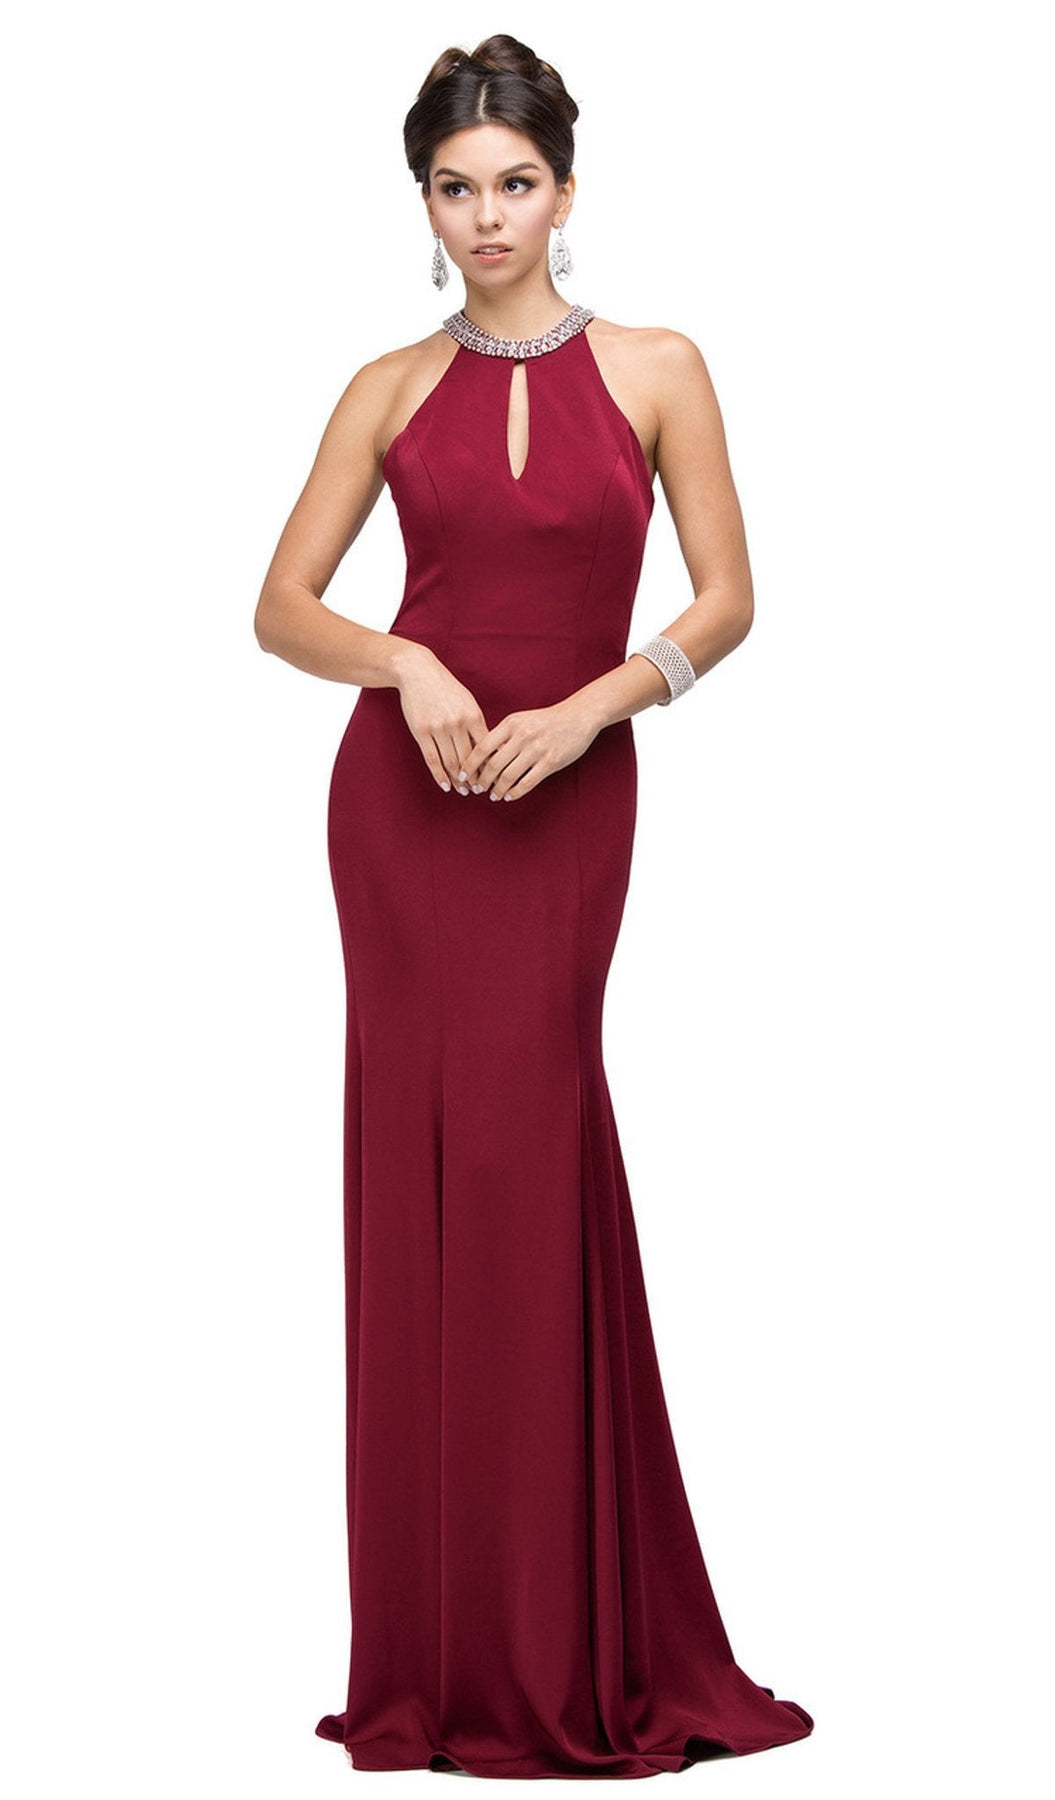 Dancing Queen - 9708 Jeweled Keyhole Neckline Long Prom Dress Special Occasion Dress XS / Burgundy